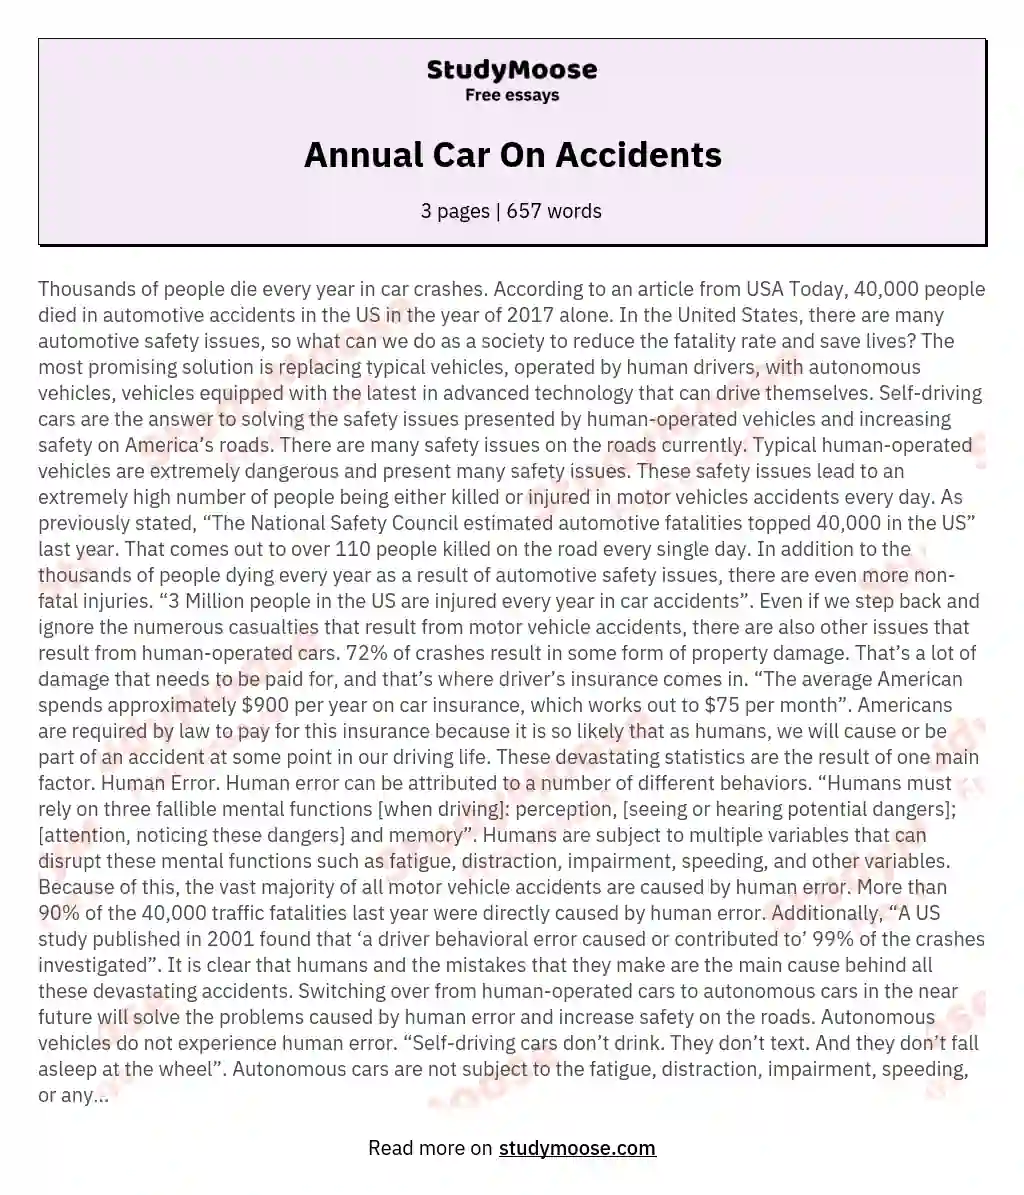 Annual Car On Accidents essay